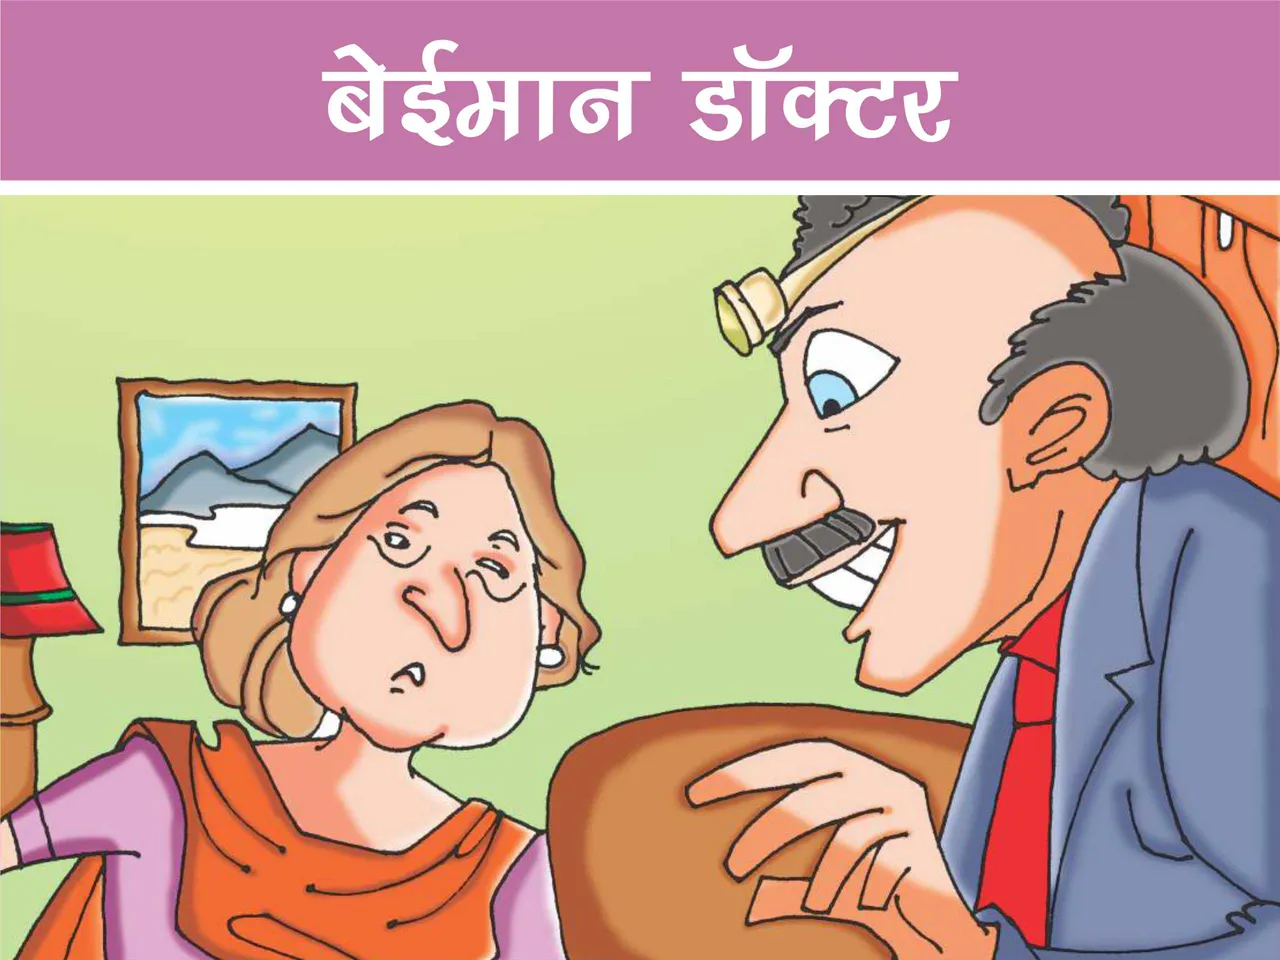 Doctor with a woman cartoon image